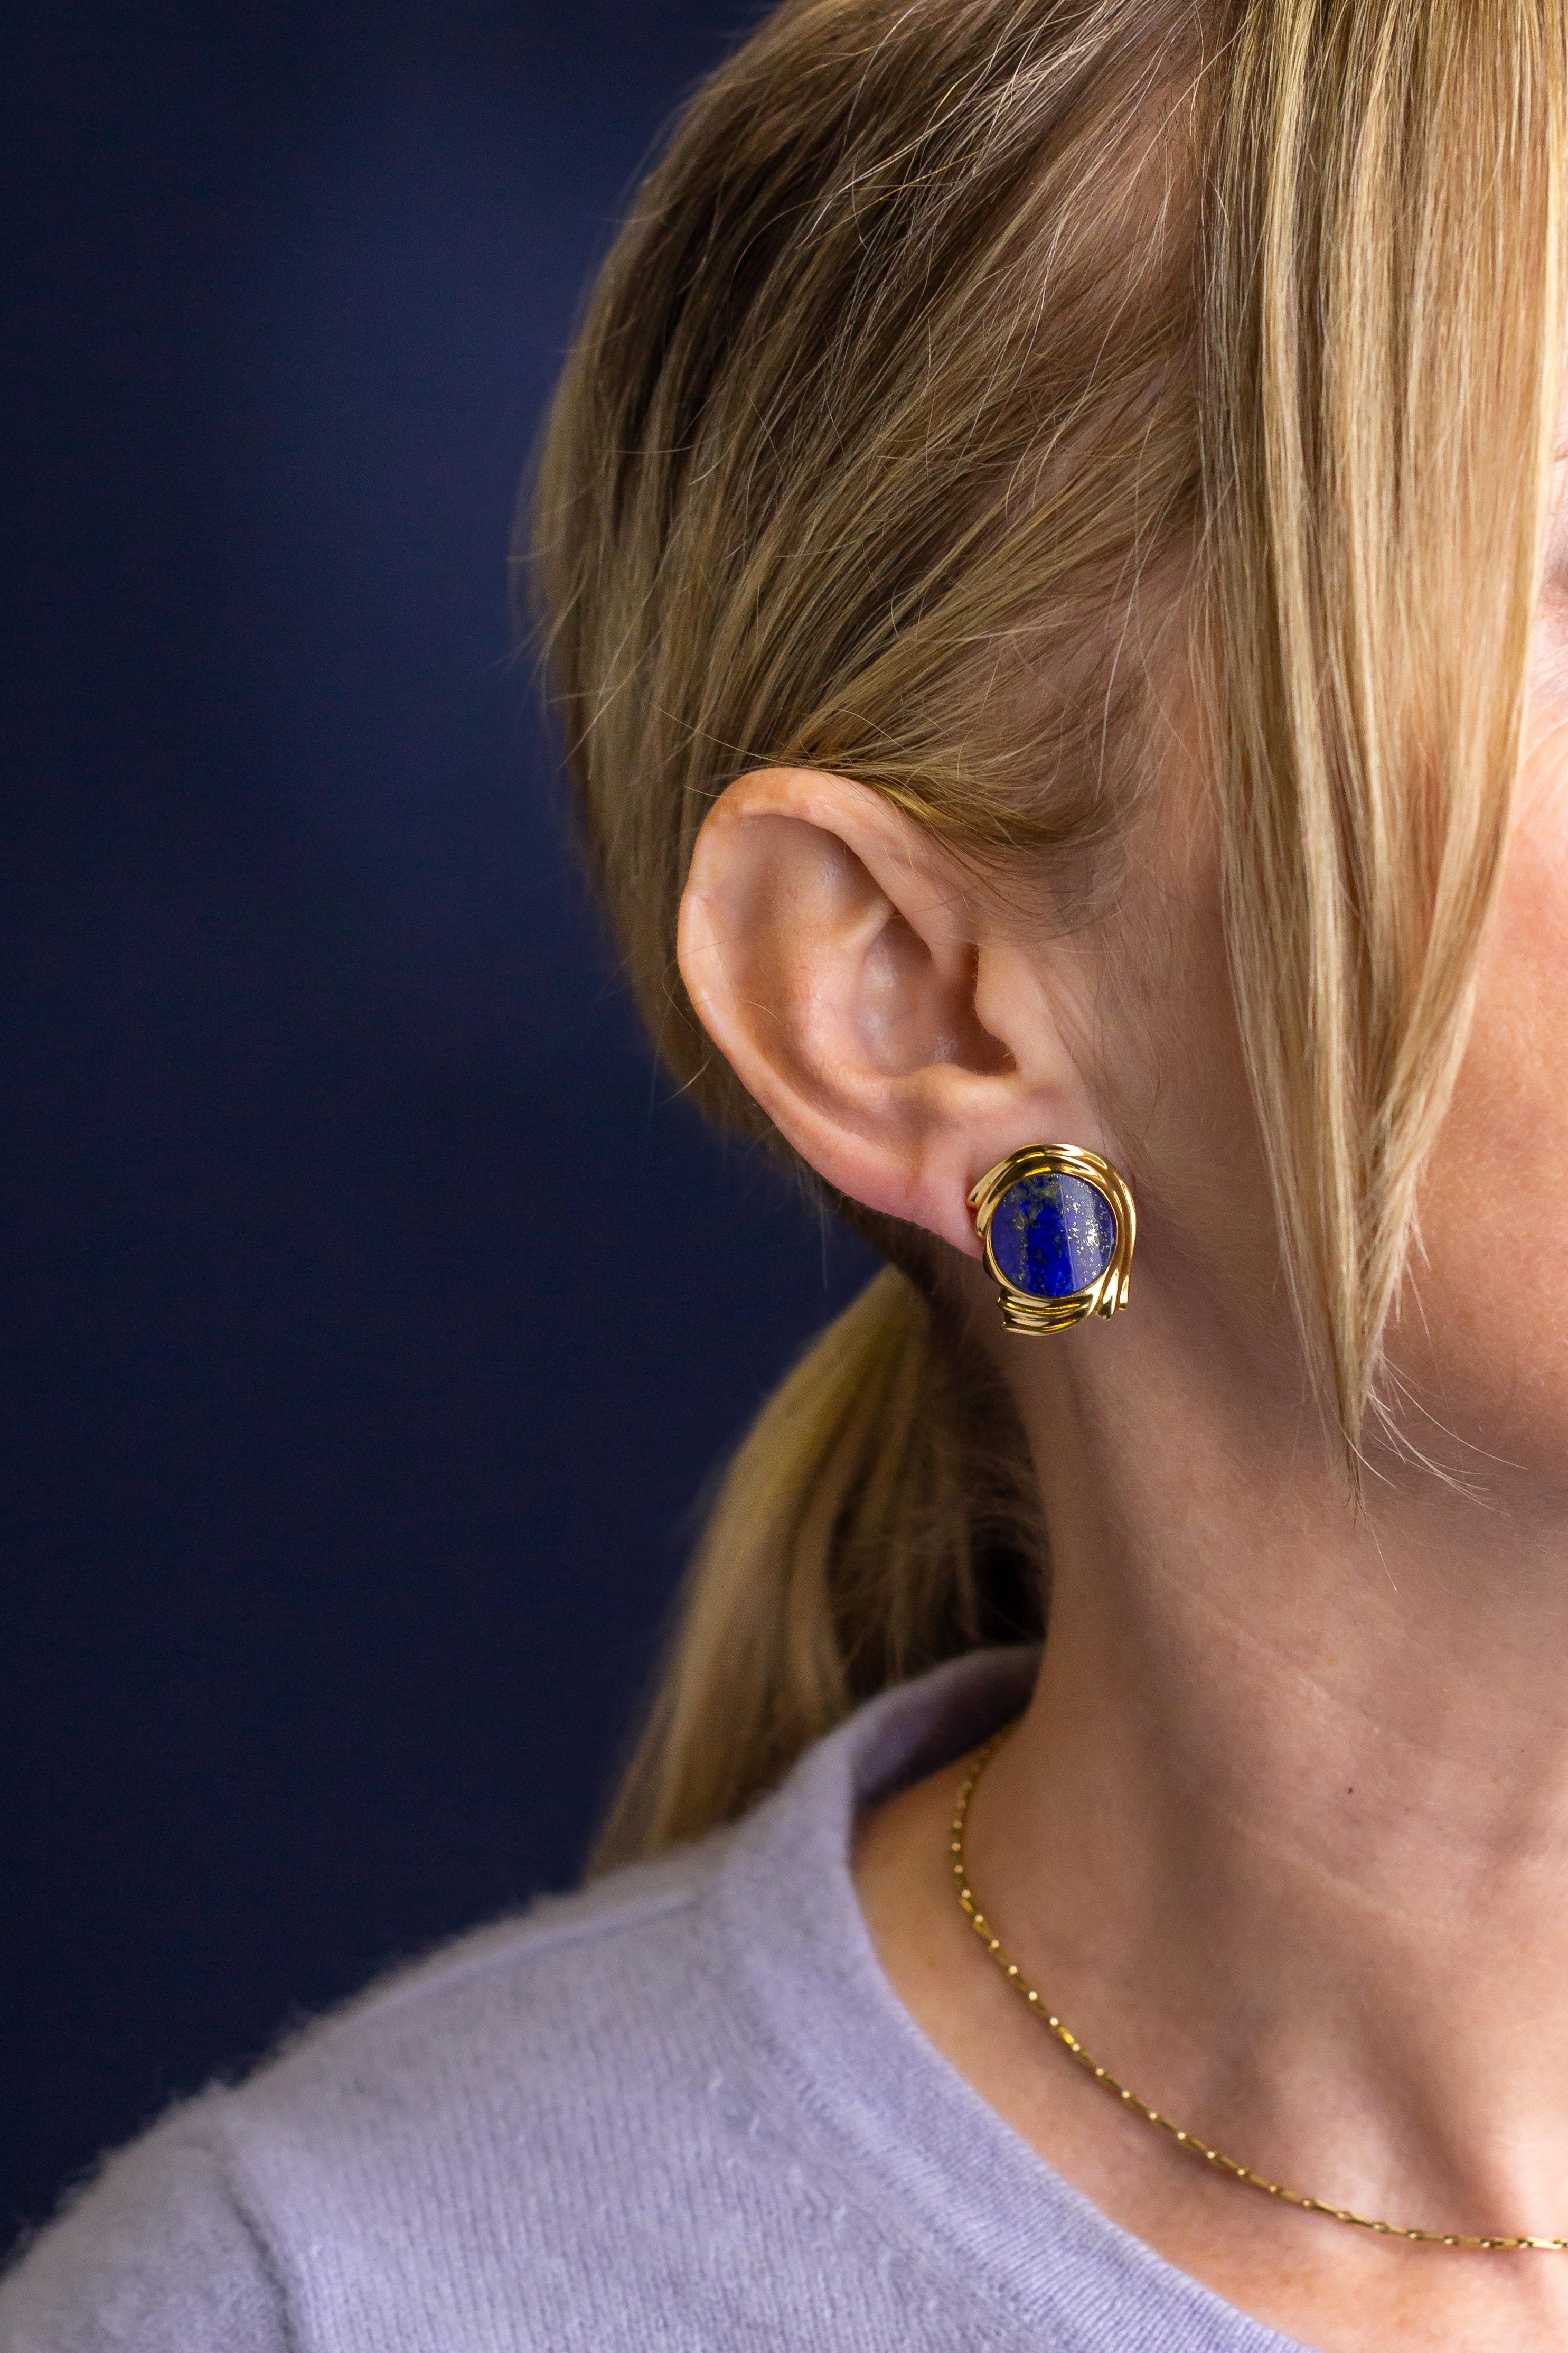 The gold flecks in these lapis and 18 karat yellow gold earrings really make them a standout in our jewel cabinets. Crafted from 18 karat yellow gold the clips each feature a curved circular polished section of lapis lazuli in a vivid blue with